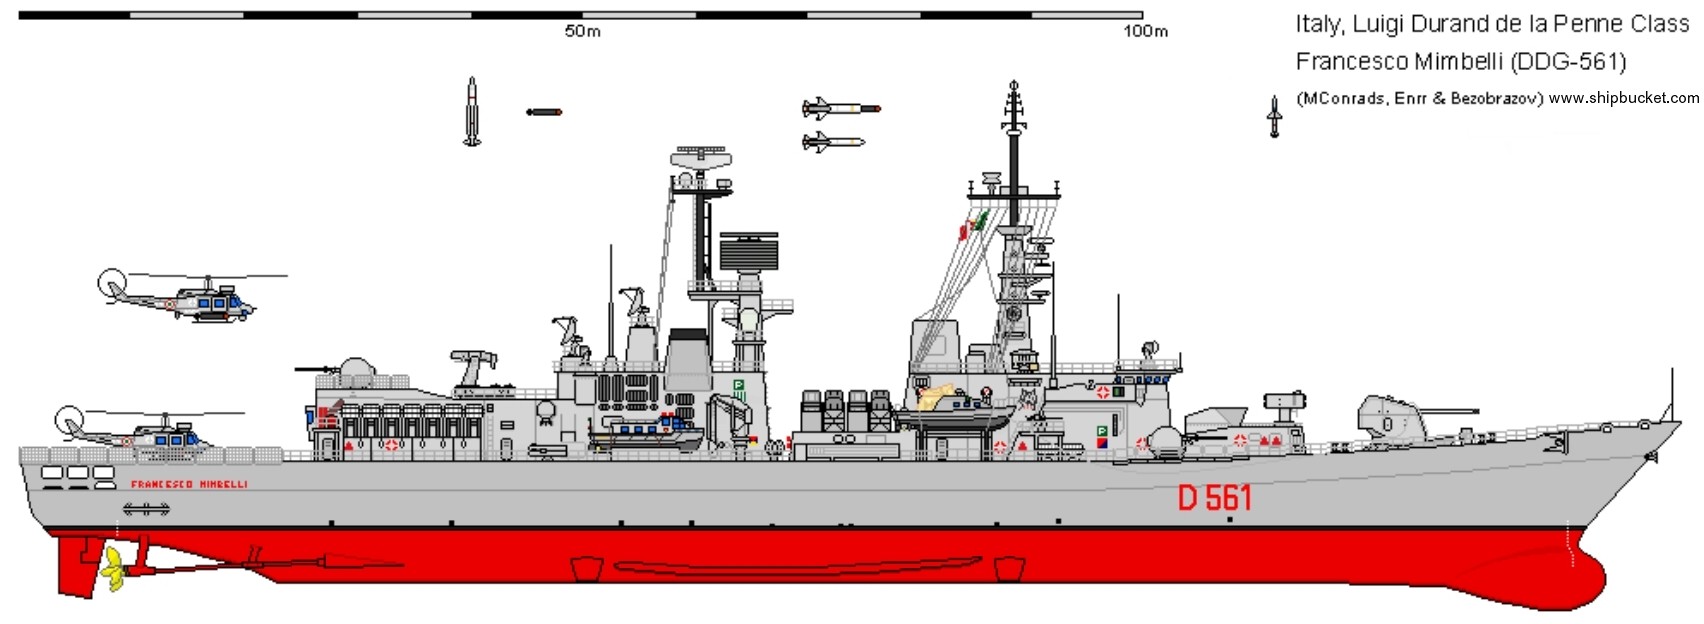 durand de la penne class guided misssile destroyer ddg italian navy marina militare mmi line drawing